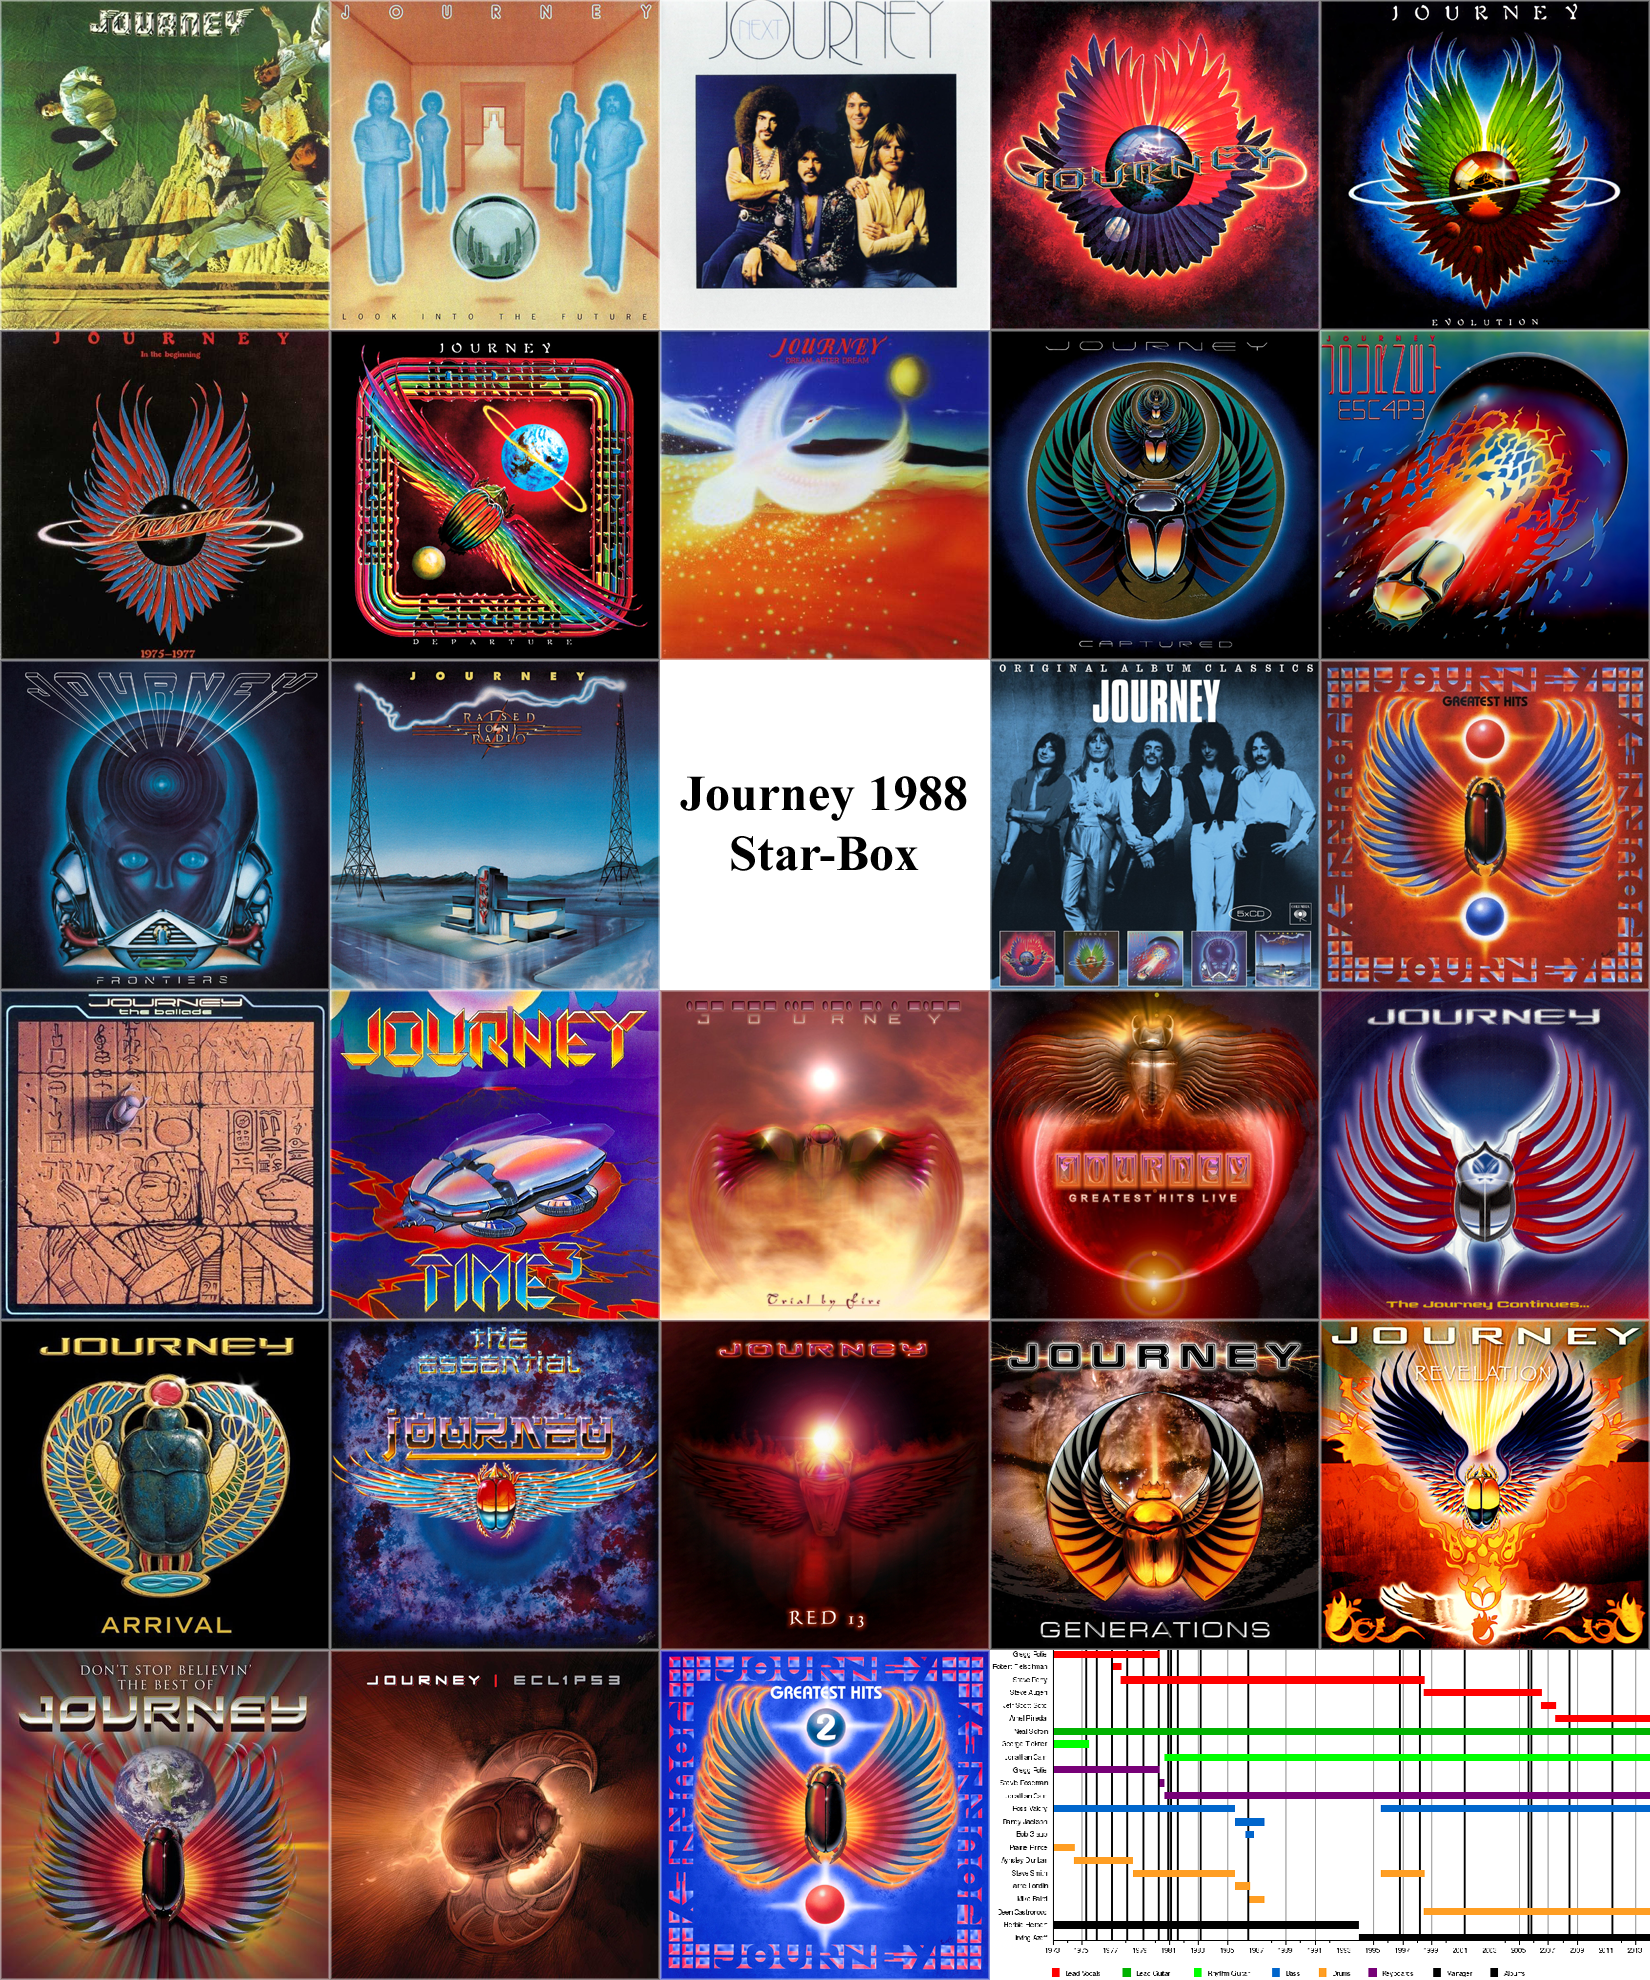 journey band albums in order